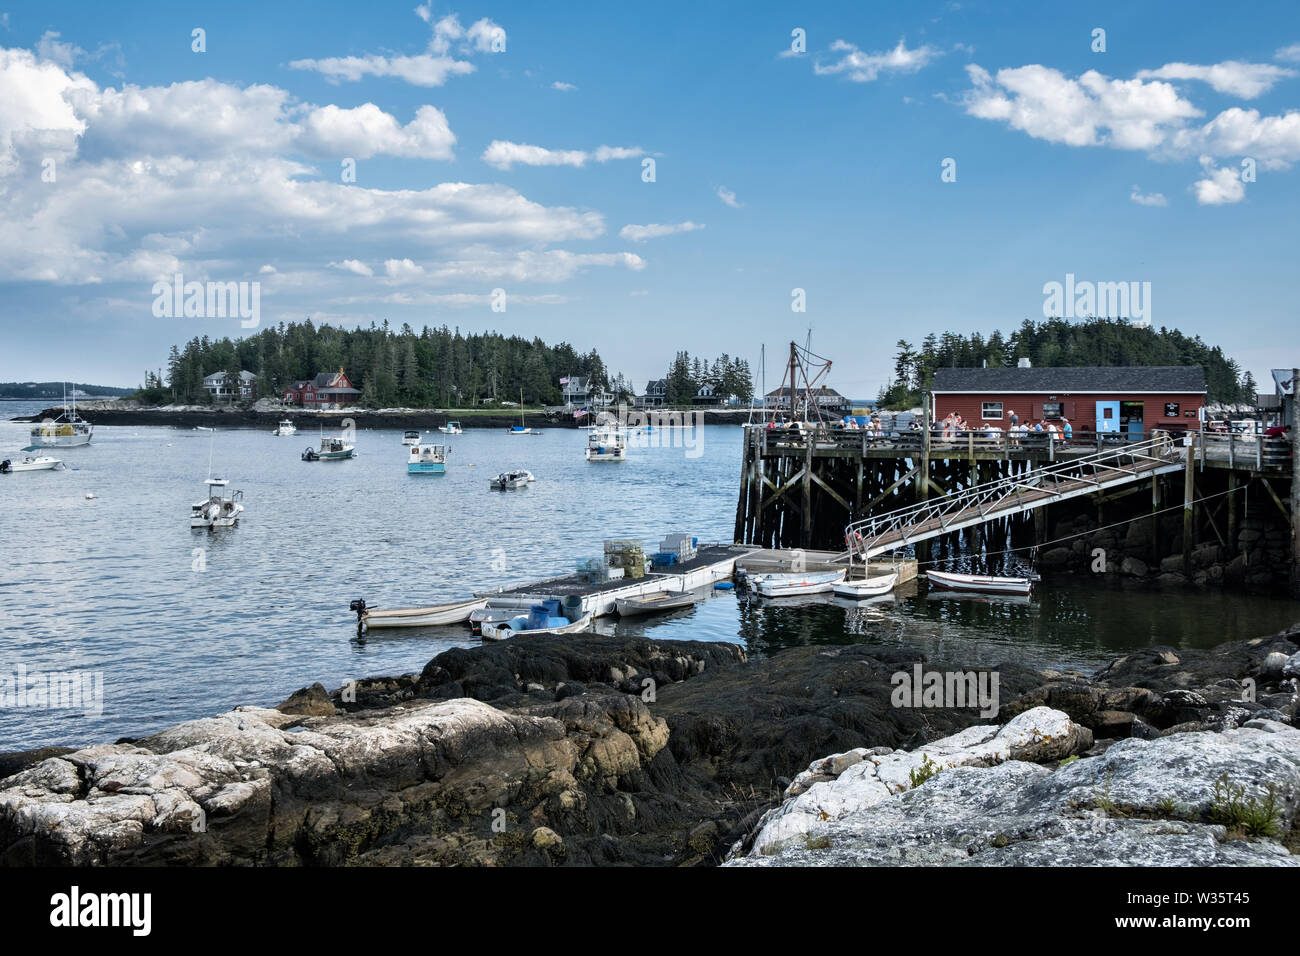 View of Five Islands Harbor with the lobster wharf, restaurant and boats moored in Georgetown, Maine. Stock Photo